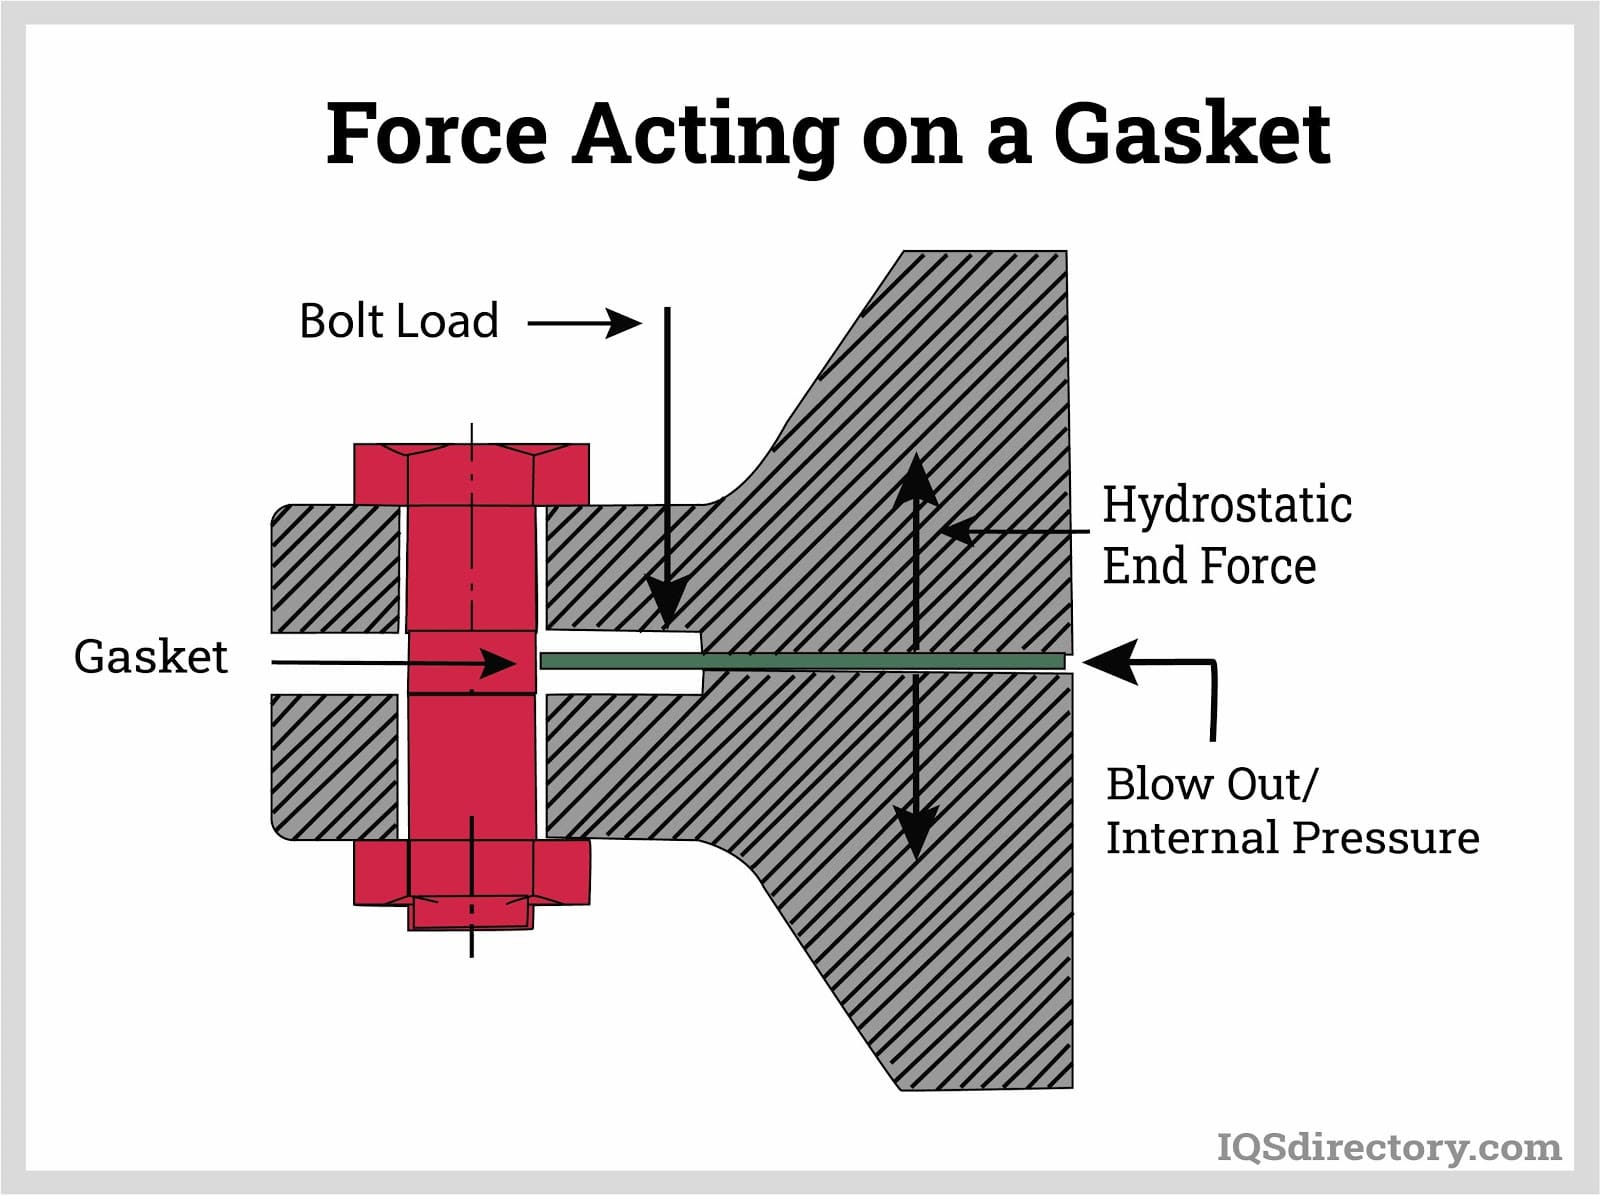 Force Acting on a Gasket